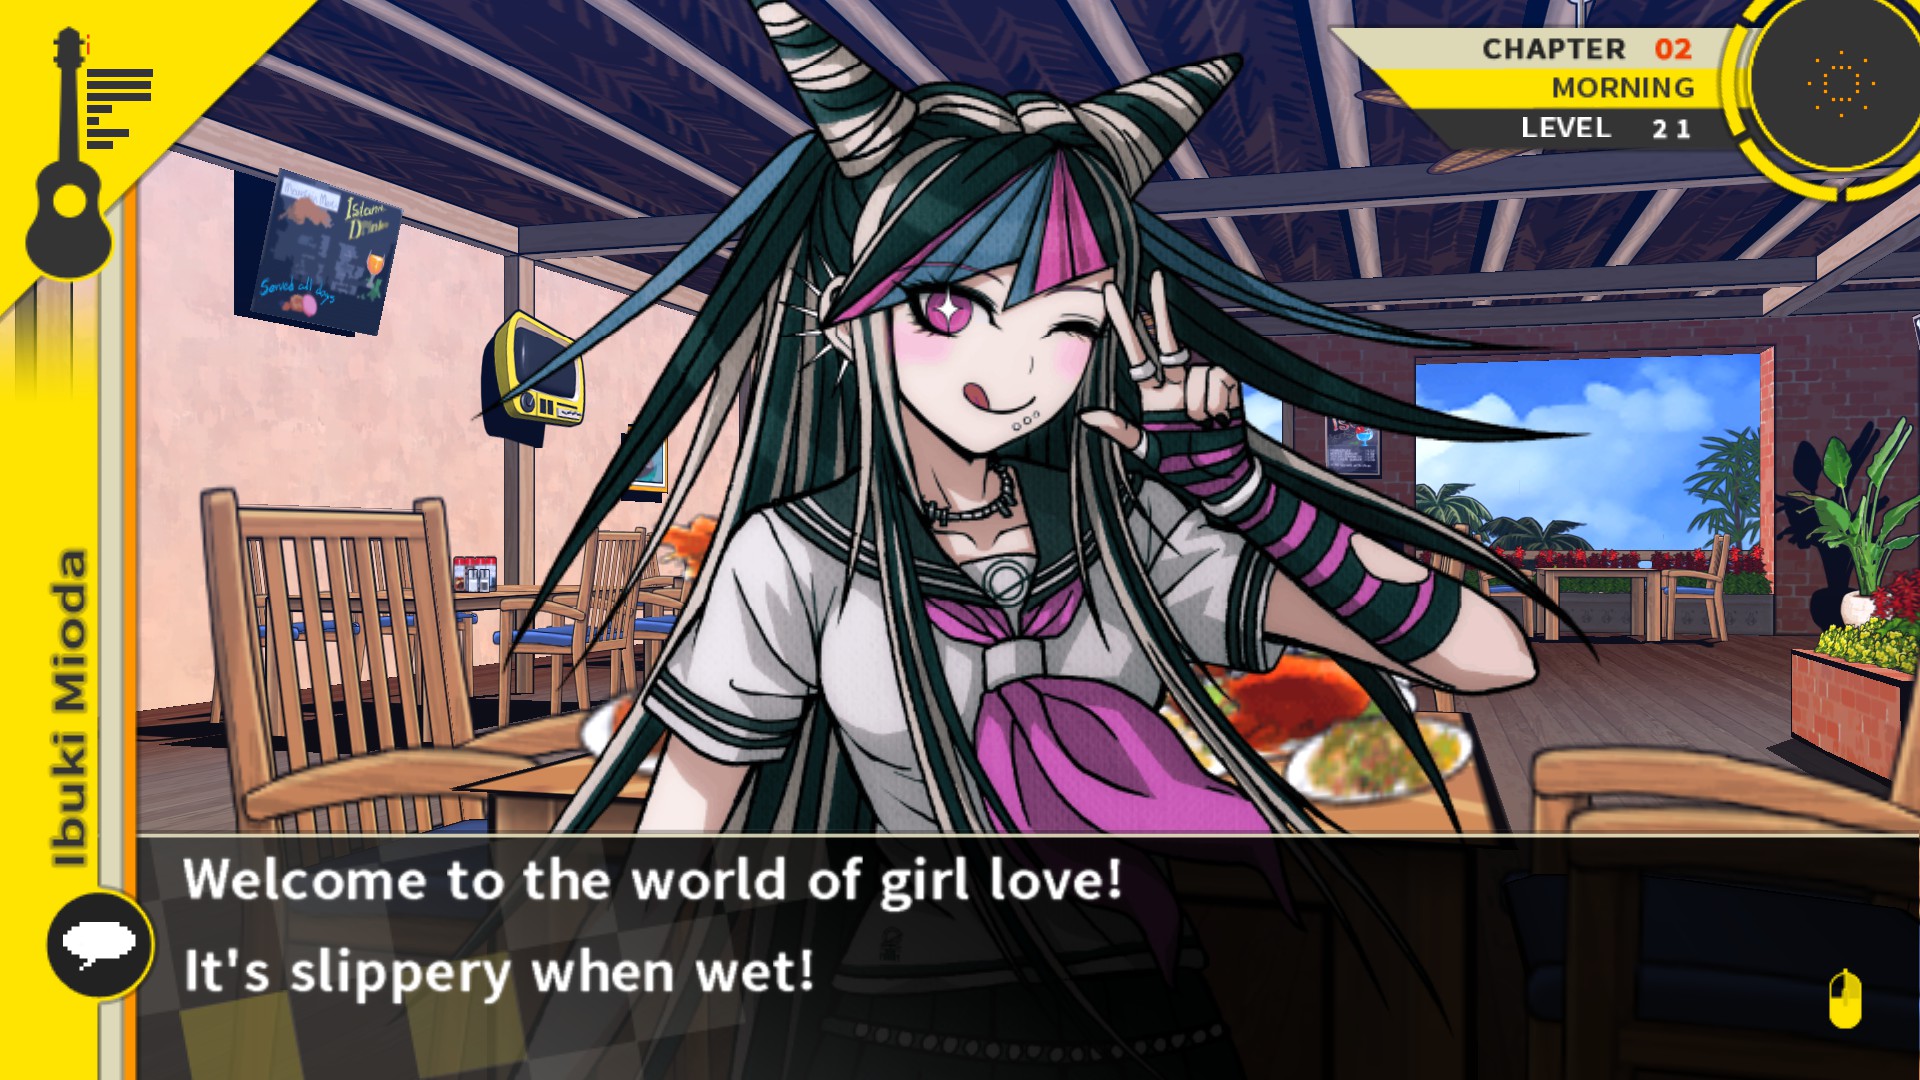 A feminine character with multicoloured hair called 'Ibuki Mioda' is winking to the camera. The dialogue box below her says 'Welcome to the world of girl love! It's slippery when wet!'